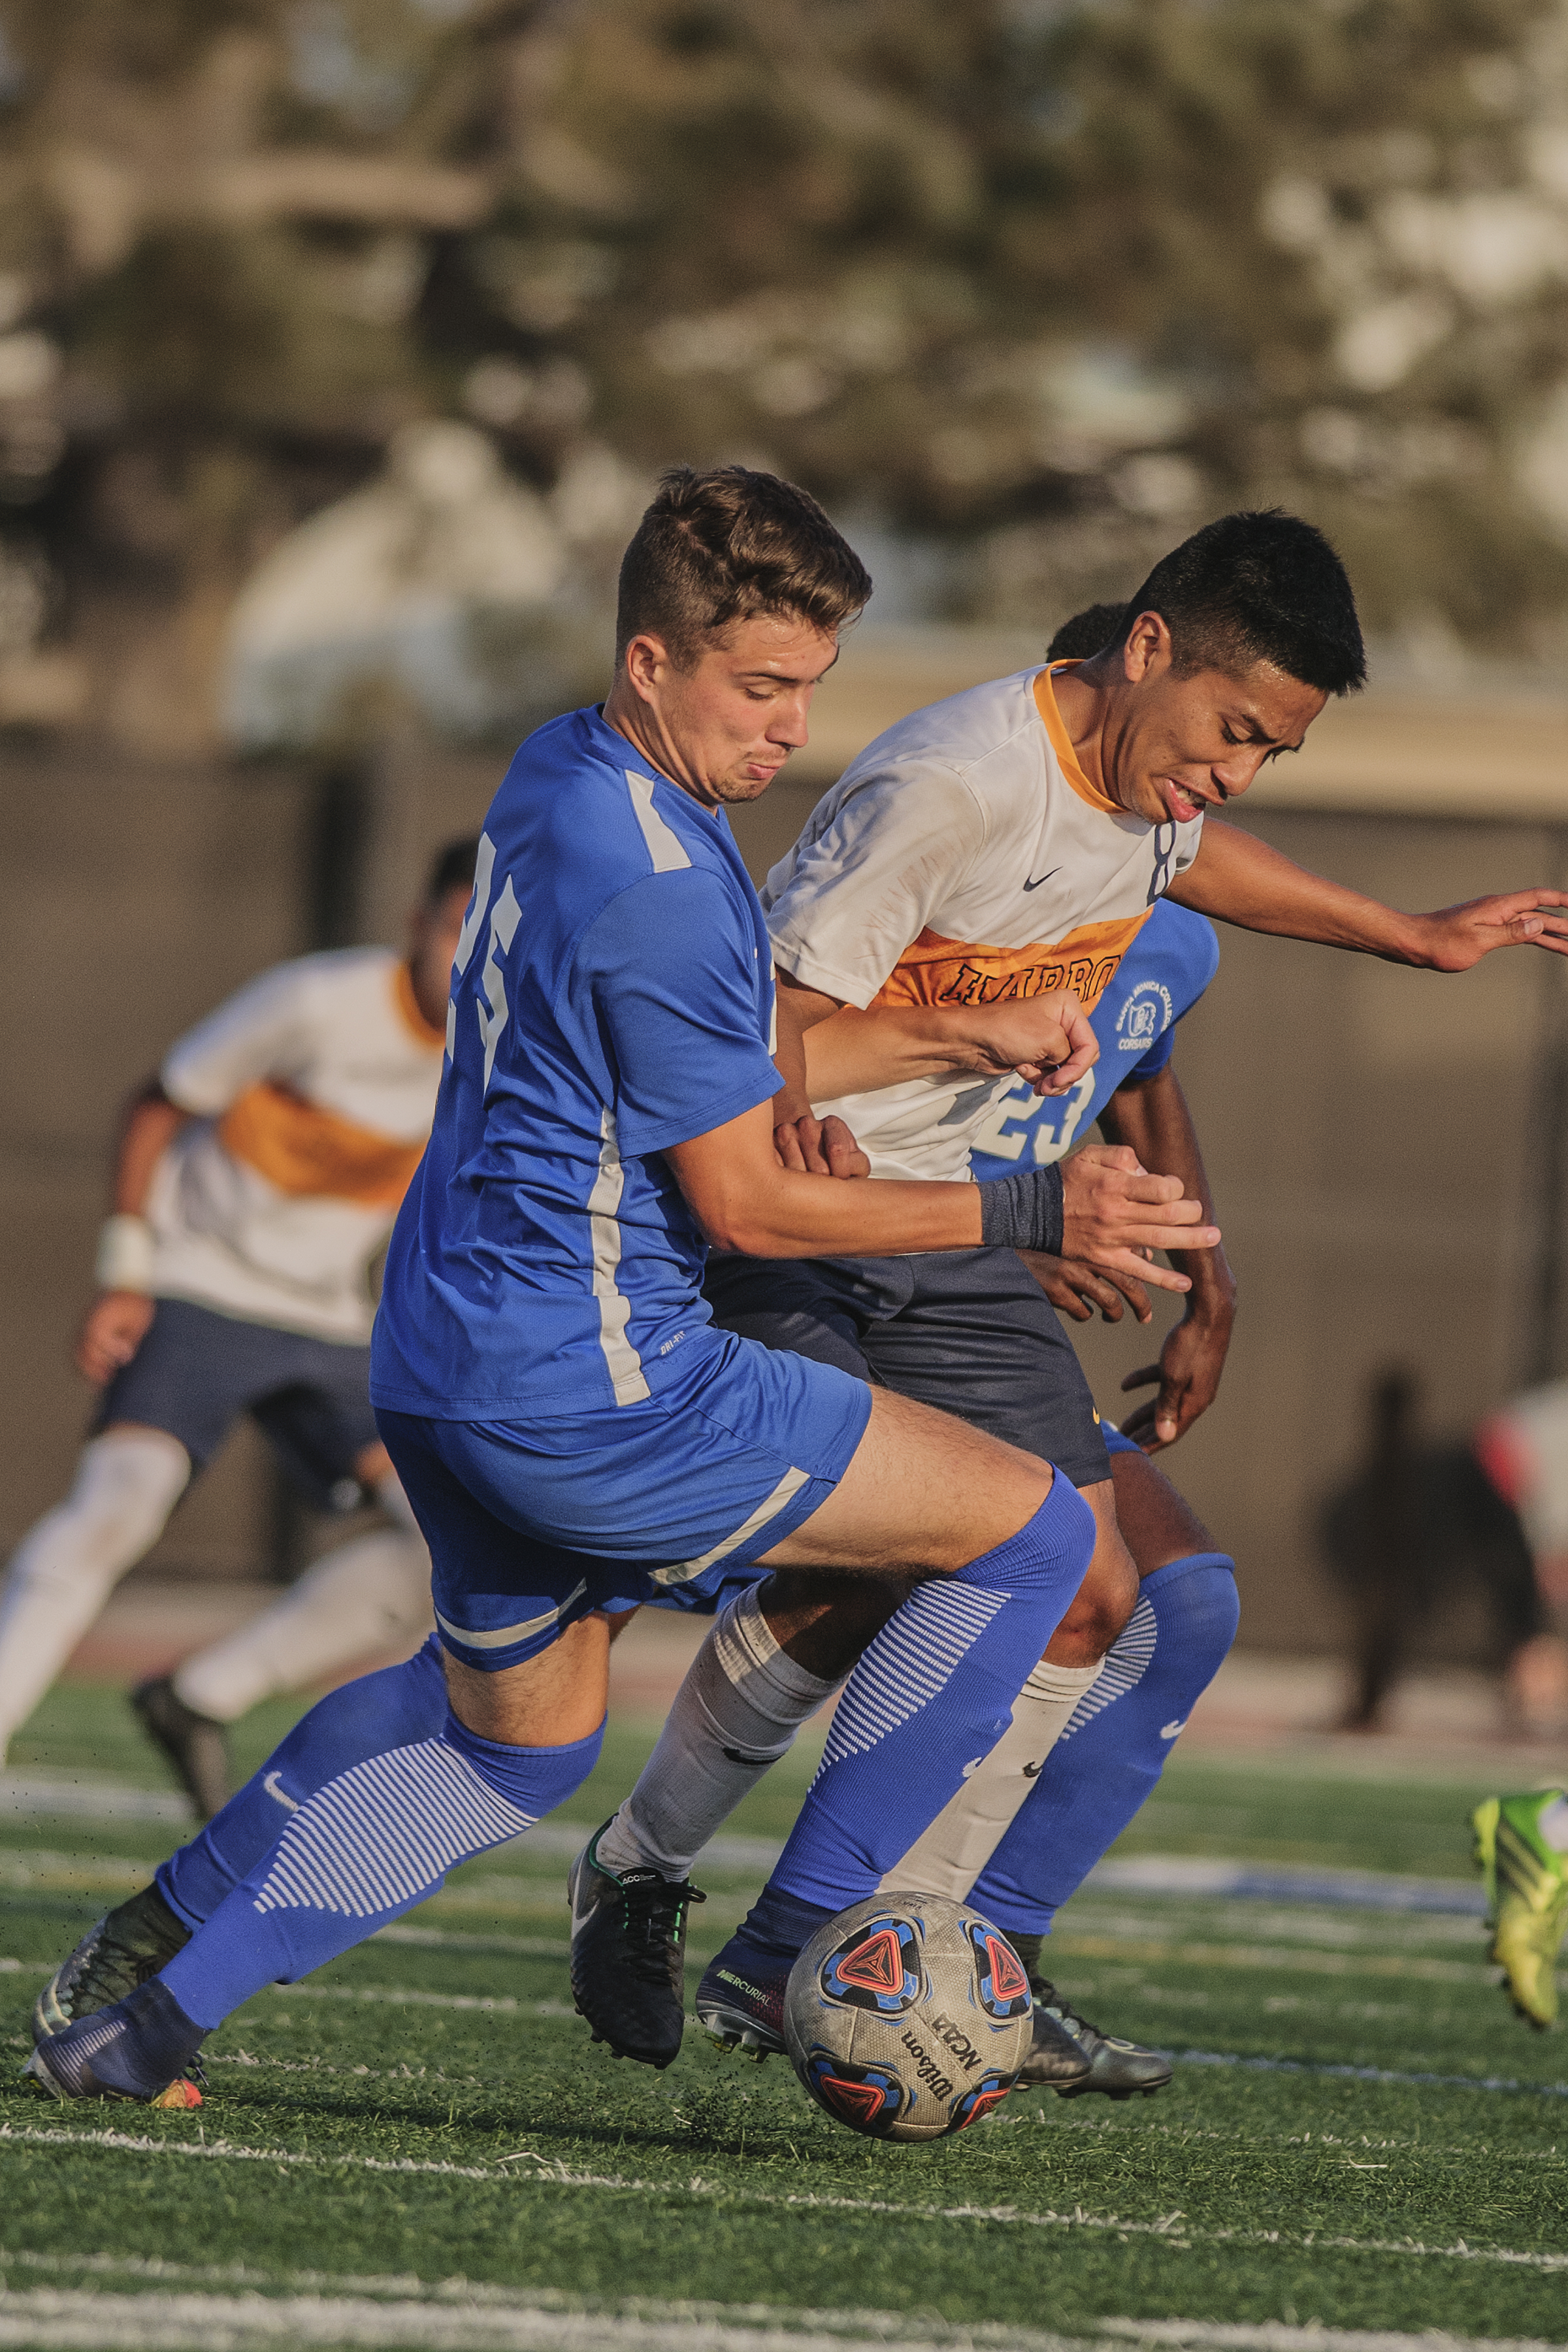  Left Michal Nowakowski from the Santa Monica College mens soccer team along with Luis Coronado from the Los Angeles Harbor College mens soccer team grab hold of each other as they both battle for the soccer ball at Corsair FIeld located on the campu